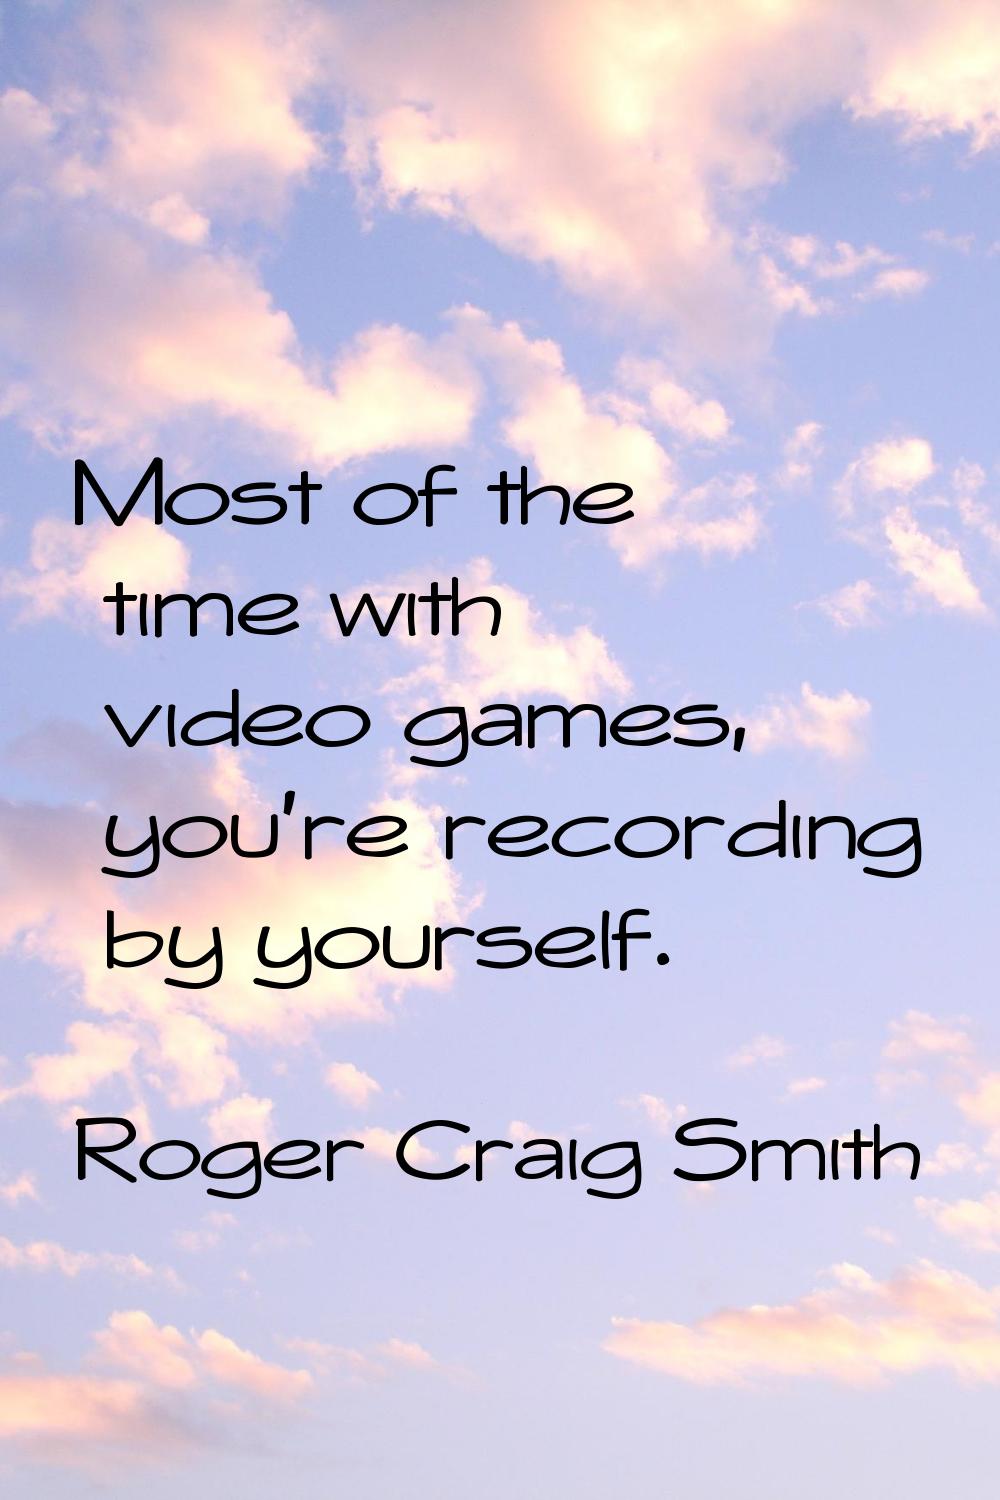 Most of the time with video games, you're recording by yourself.